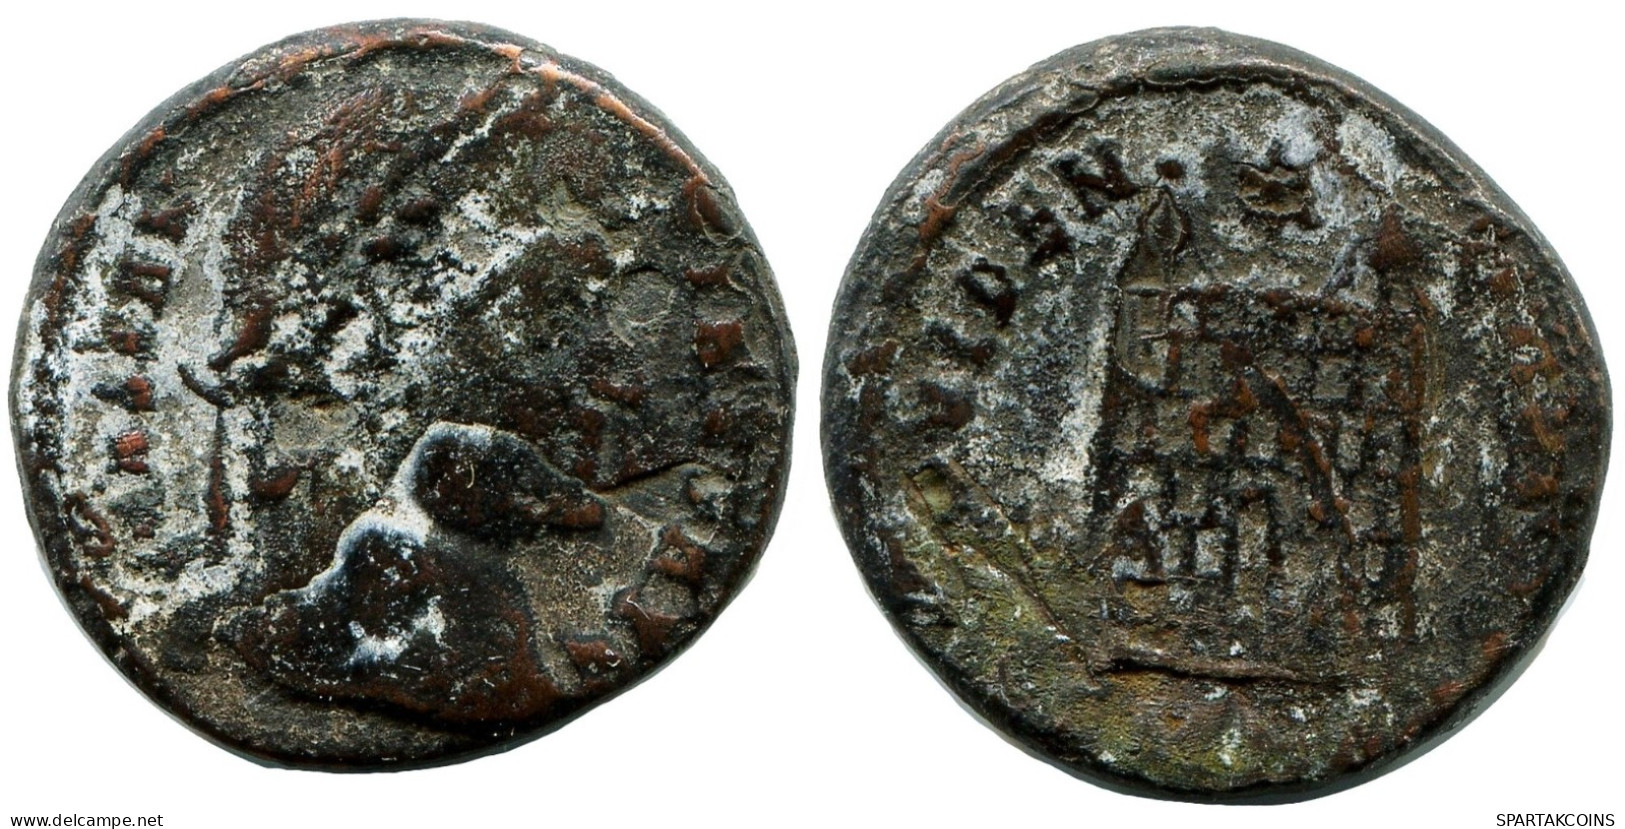 CONSTANTINE I MINTED IN CYZICUS FROM THE ROYAL ONTARIO MUSEUM #ANC10978.14.D.A - El Impero Christiano (307 / 363)